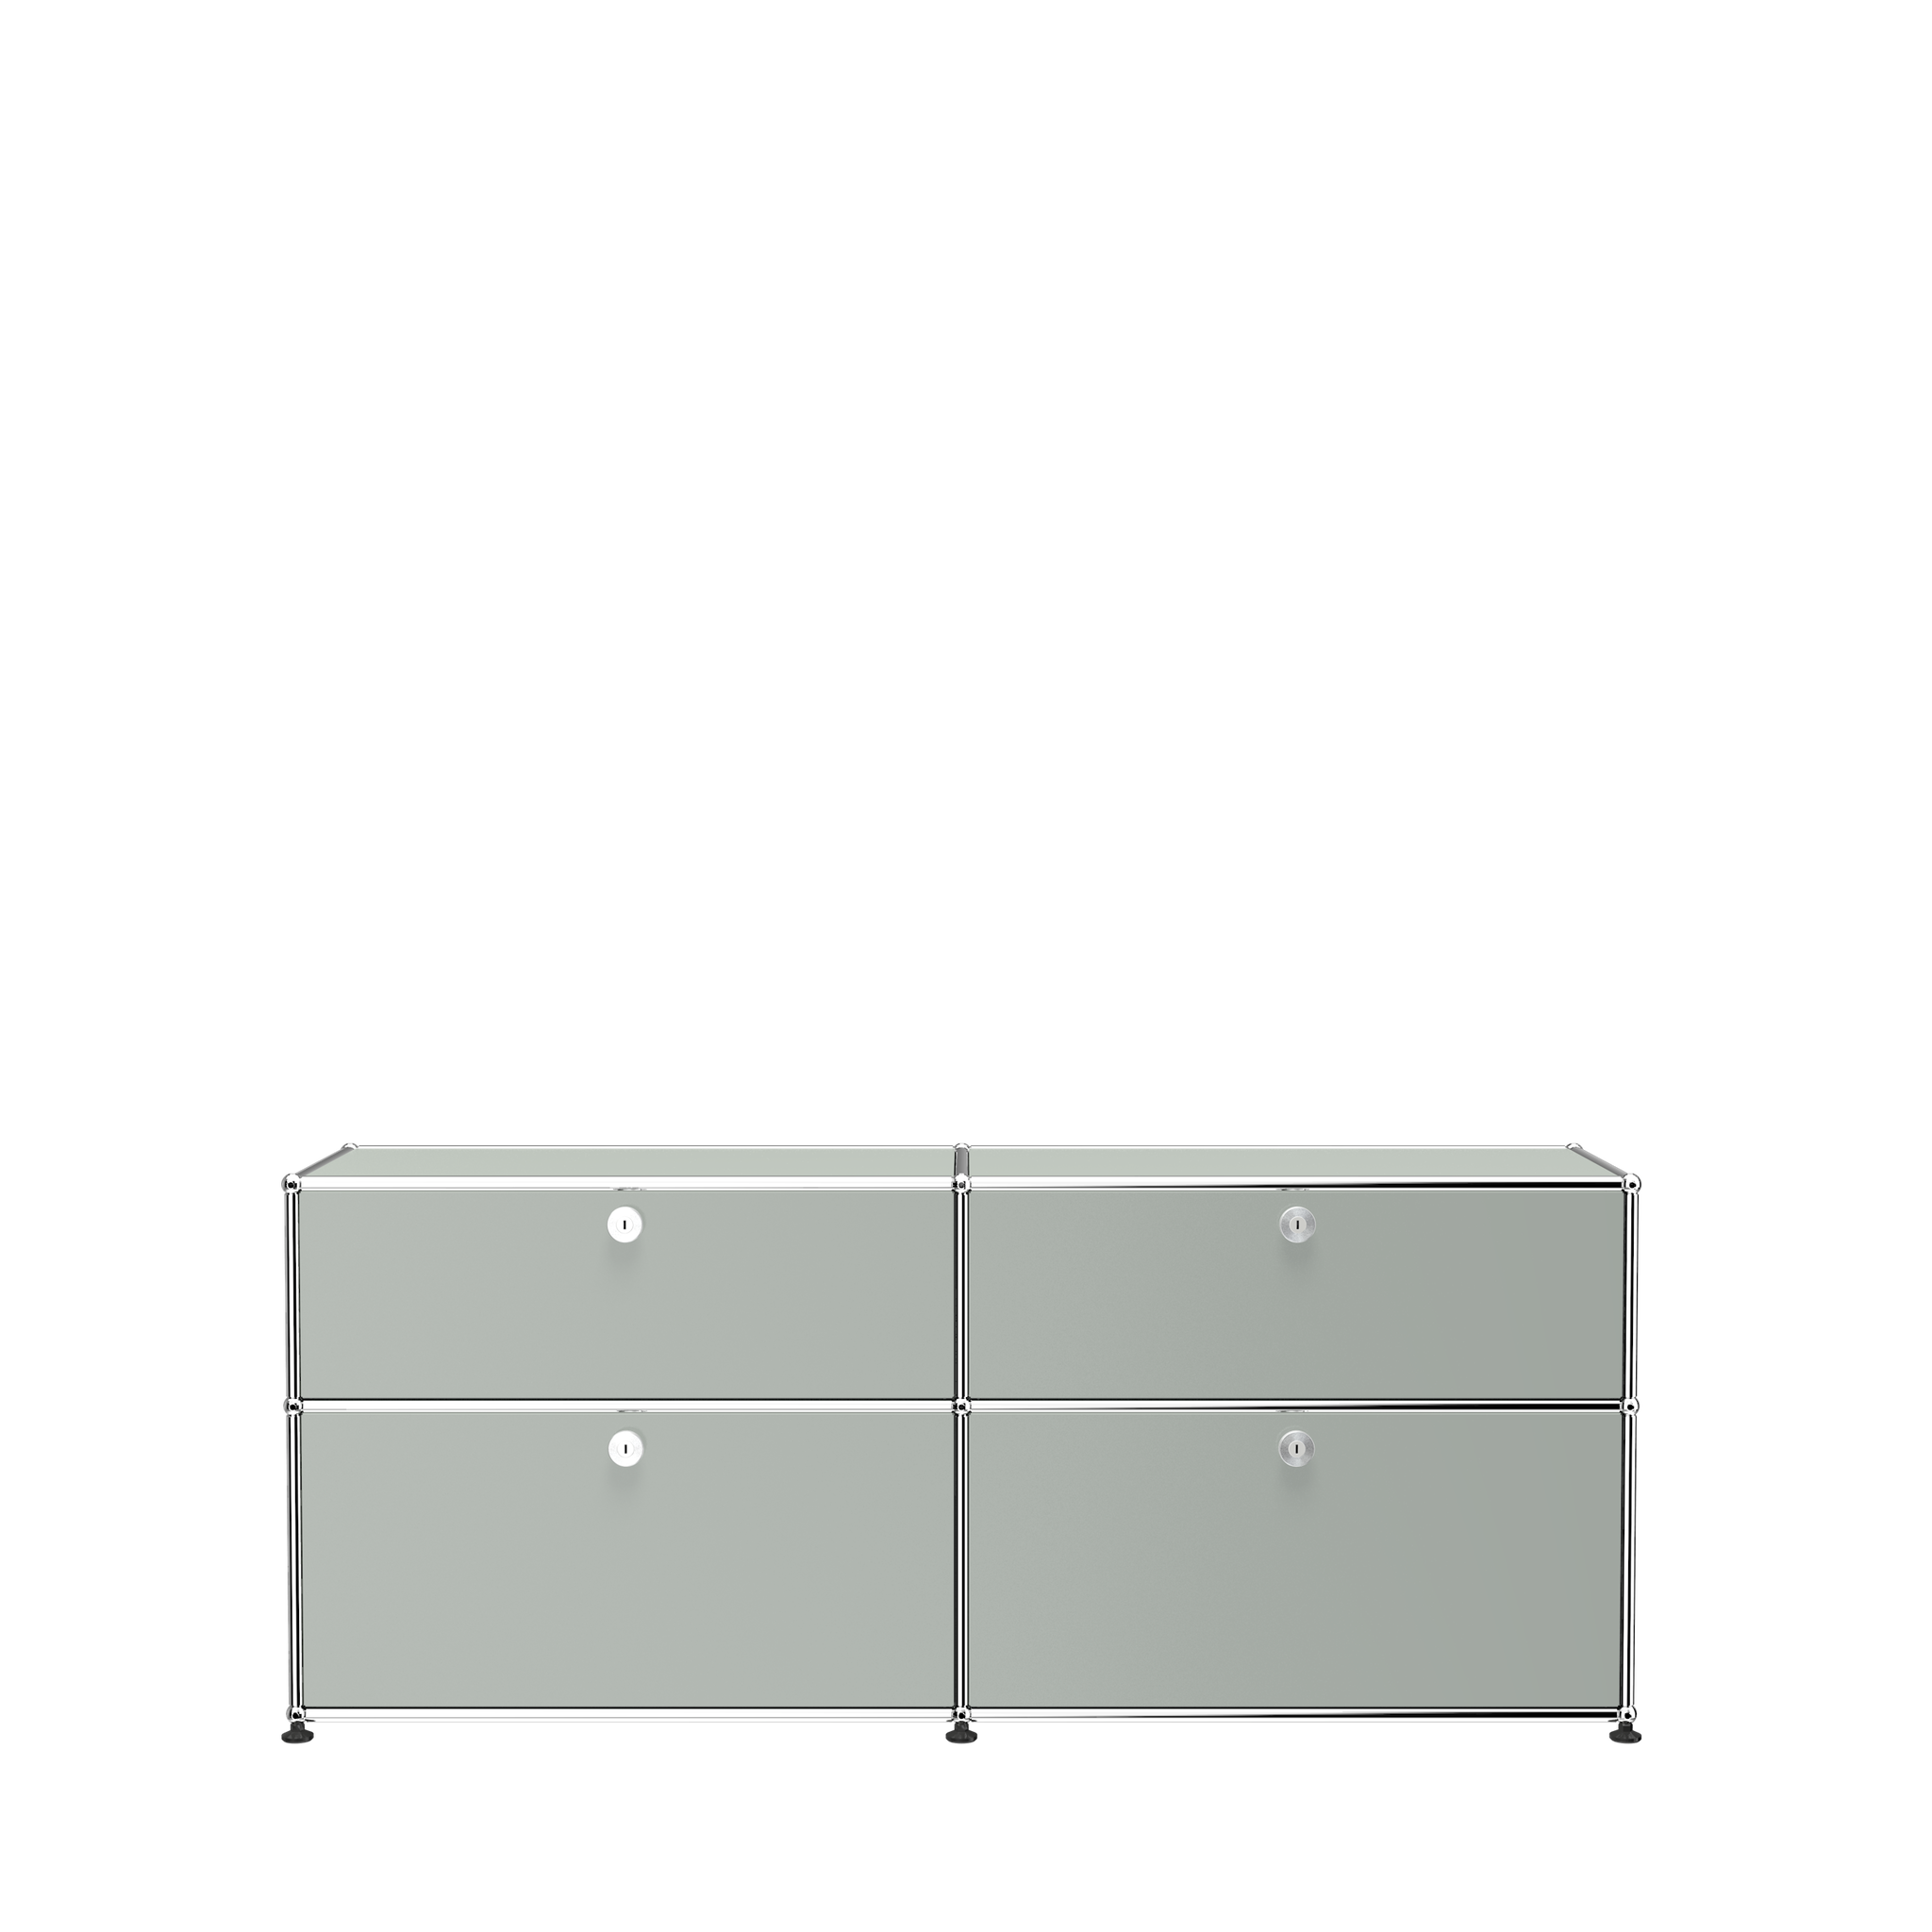 USM Haller Storage Credenza Sideboard with Drawers (D) in Light Gray